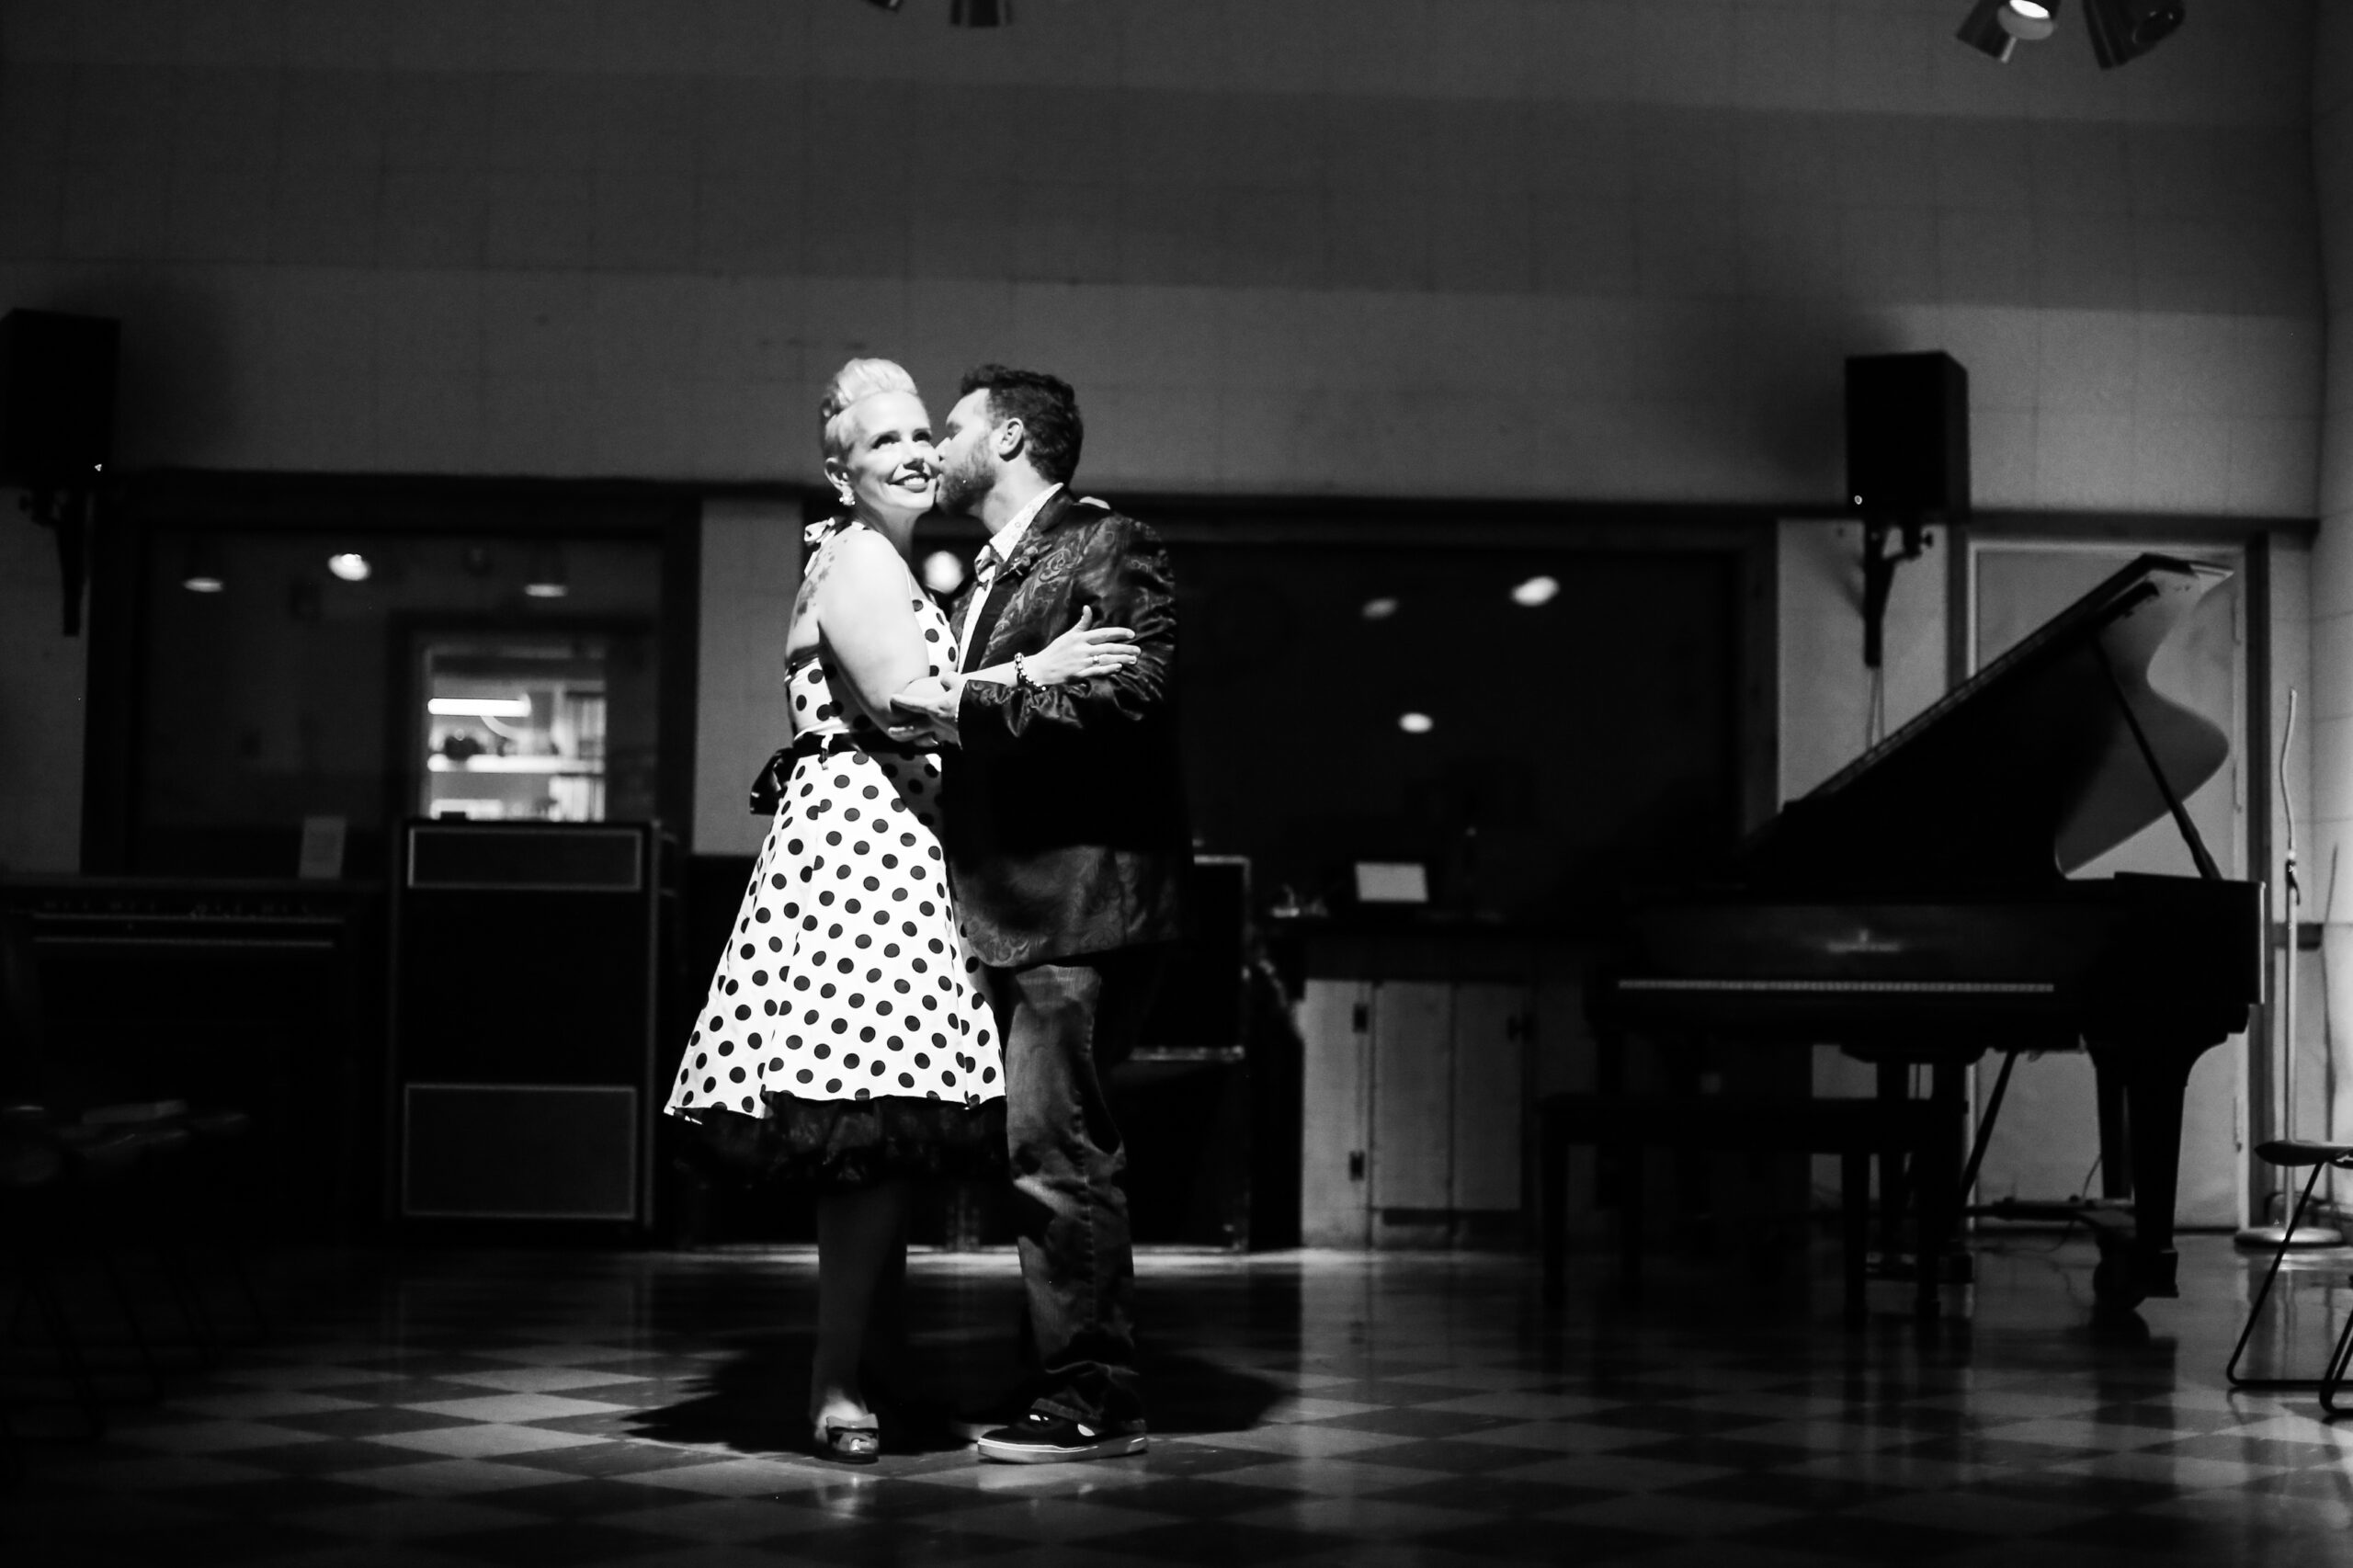 A black and white image of the bride and groom dancing under a spotlight on a black and white checkered floor. An opened grand piano is in the back ground on the right. The window to the audio engineer's room is lit up on the left. The bride is wearing a halter neck white pinup dress with black polka dots. She has a black belt and a black crinoline petticoat. The bride has peep toe shoes with a small bow. She has pearl and rhinestone earrings and a silver beaded bracelet. The groom is wearing a black silk suit jacket with a paisley pattern, a white shirt with small blue flowers, a red rose boutonniere with dark washed jeans and black sneakers. She is smiling while looking upwards as he leans in to kiss her cheek. 